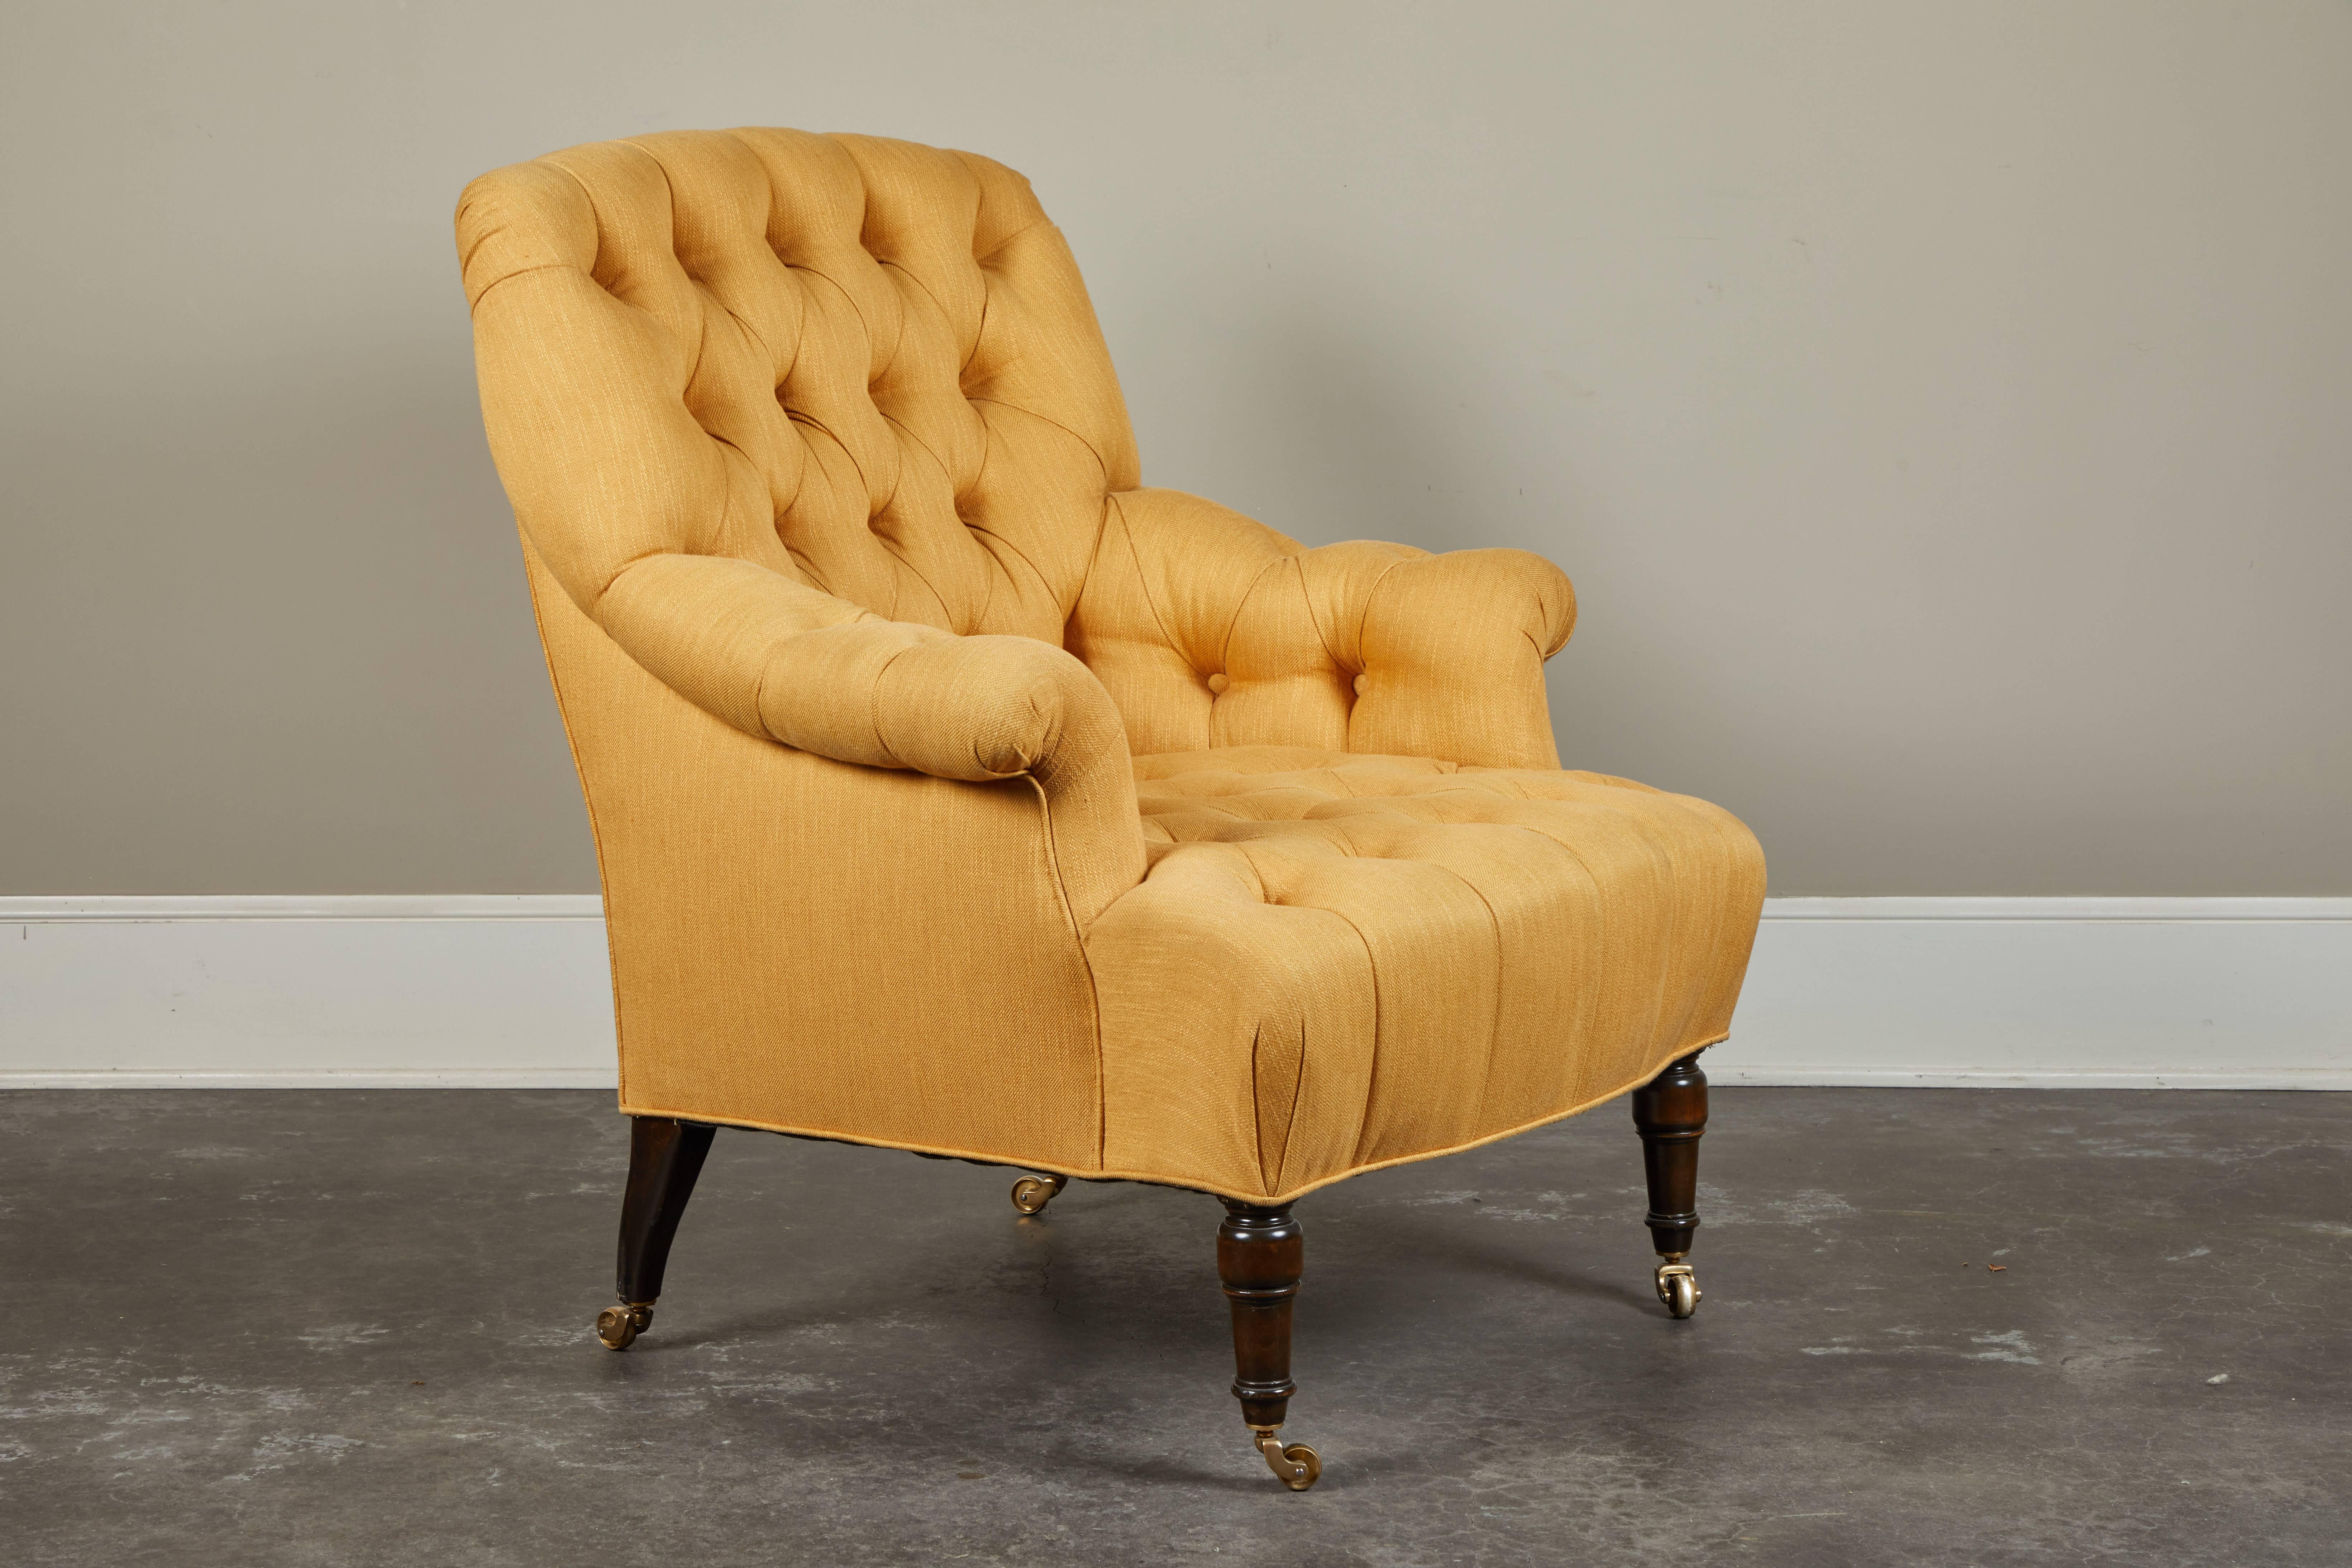 A fully upholstered tufted club chair on castors. Proportions taken from an original antique, reproduced as a mate.  Part of the Susanne Hollis Collection.  6-8 week lead time. 6 yards of fabric needed, priced COM.